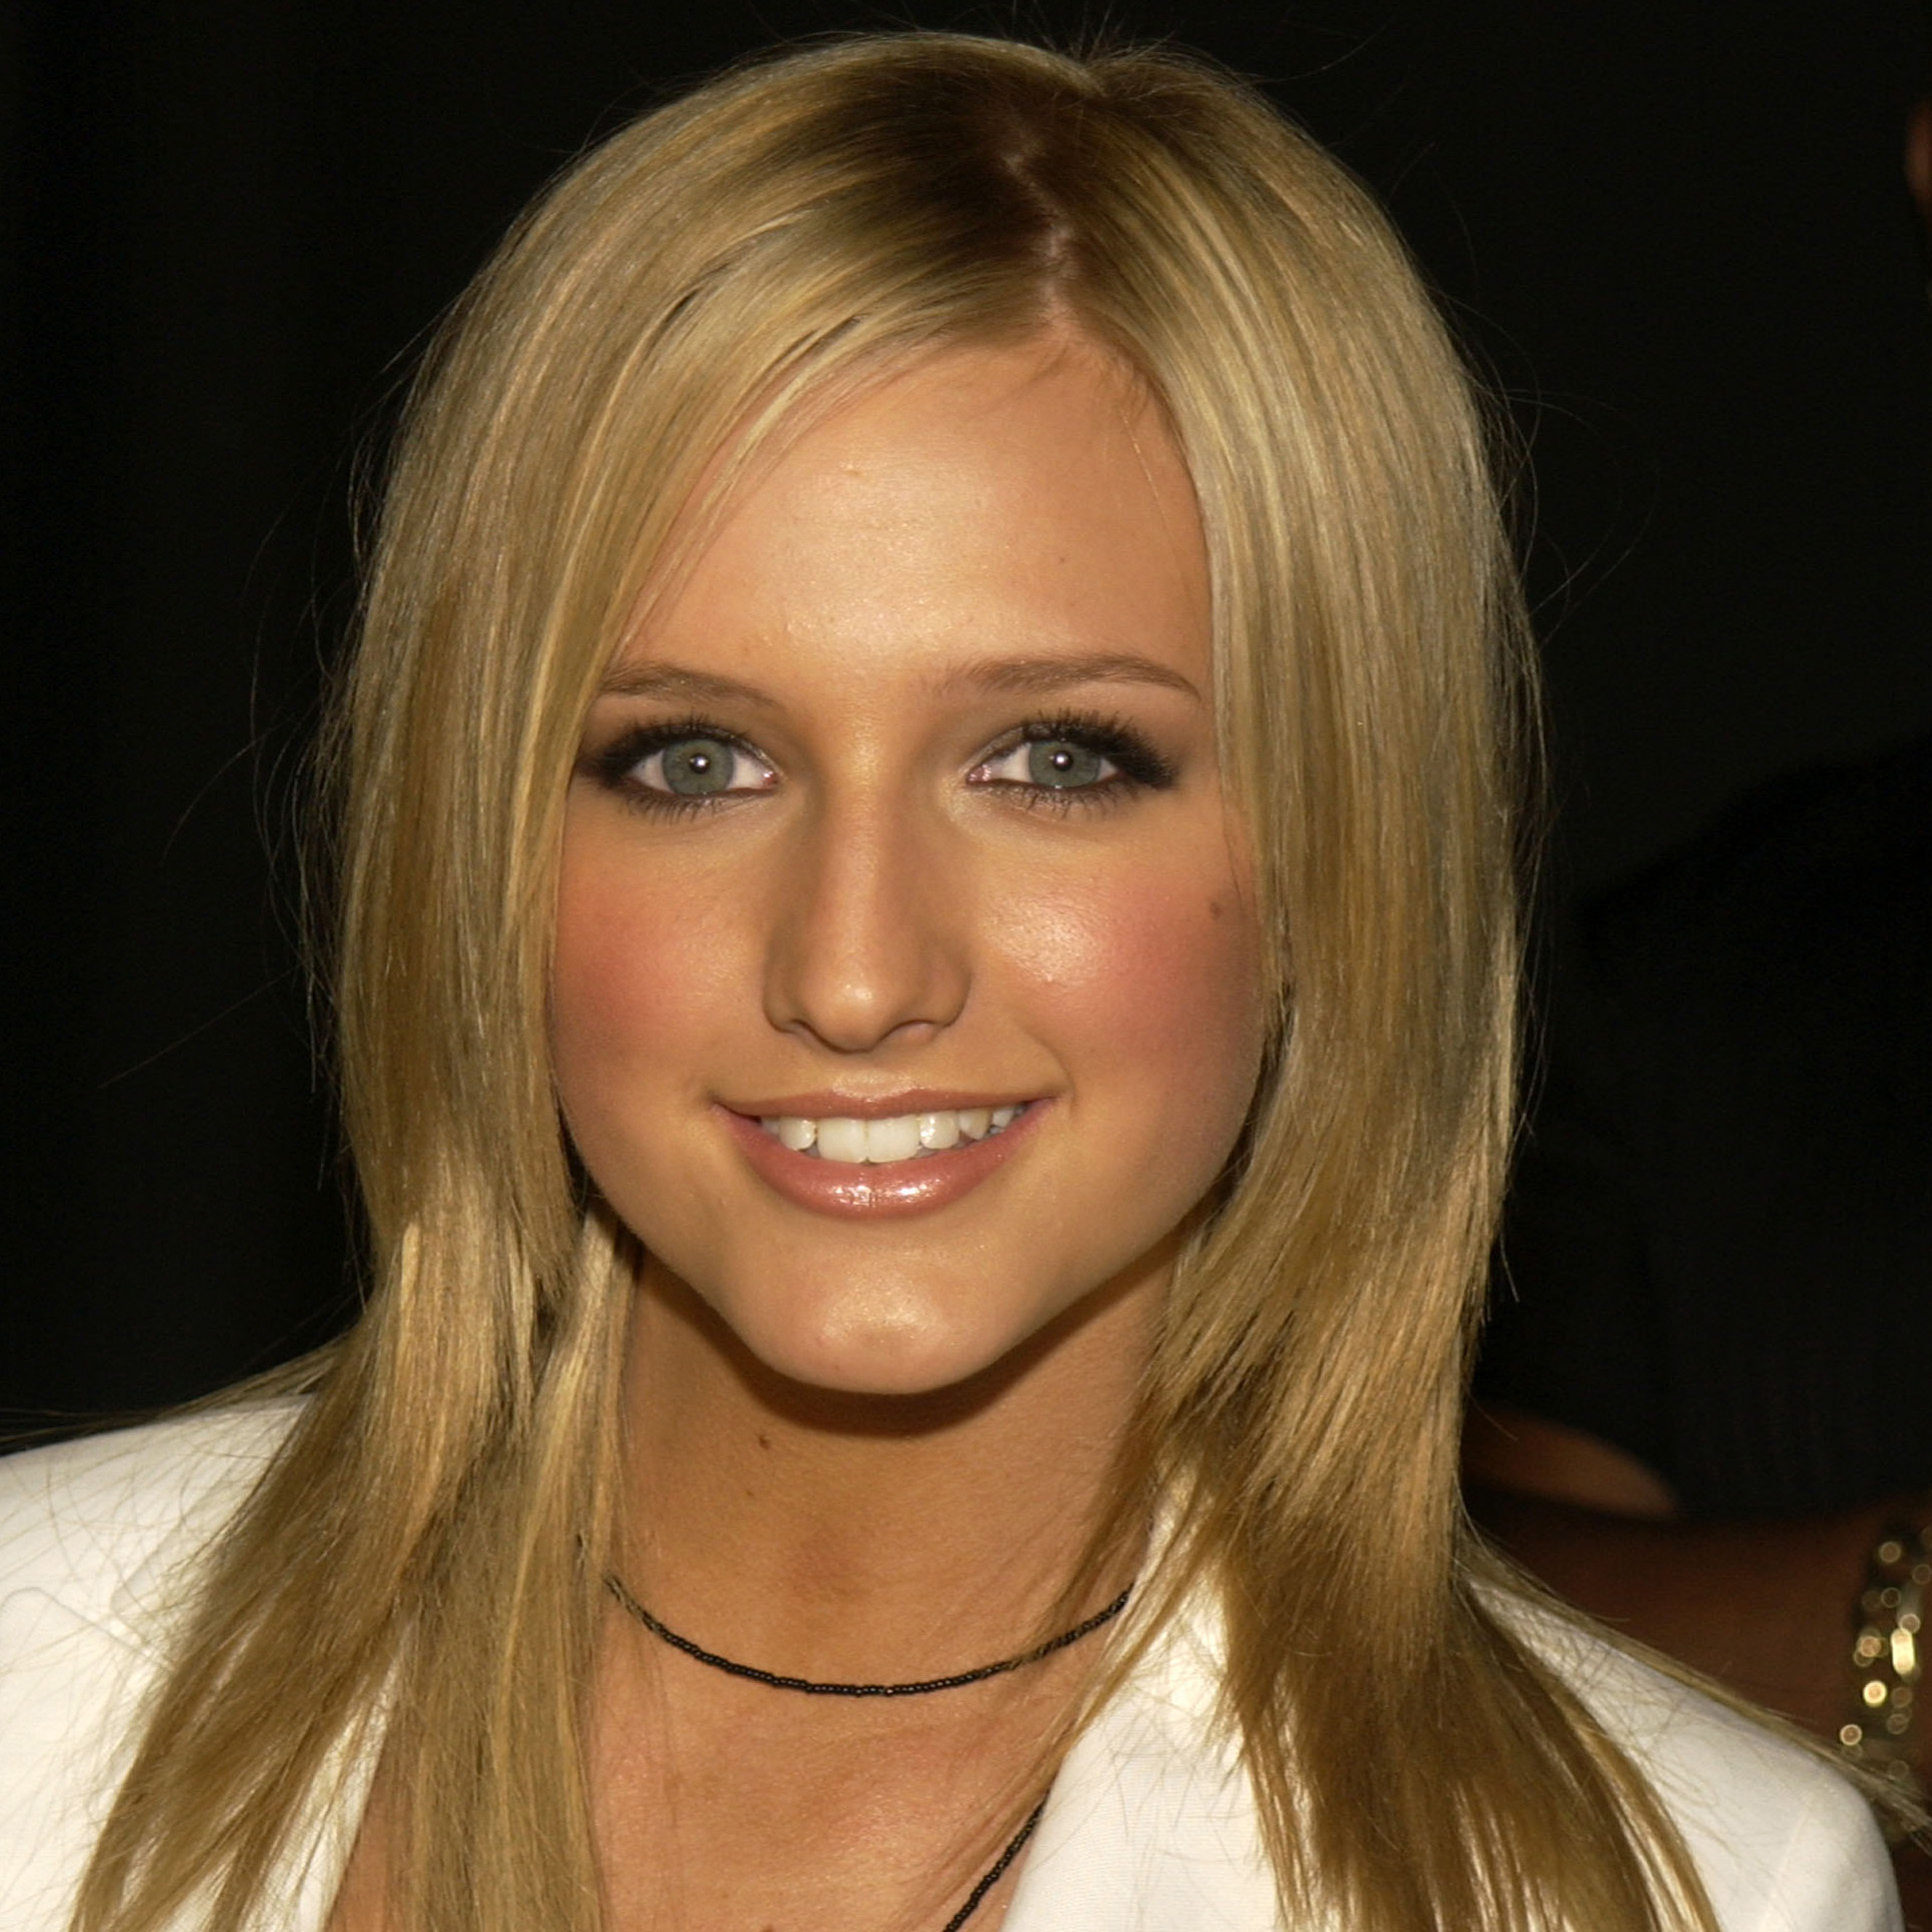 800px x 800px - Ashlee Simpson's Transformation and Plastic Surgery Speculation